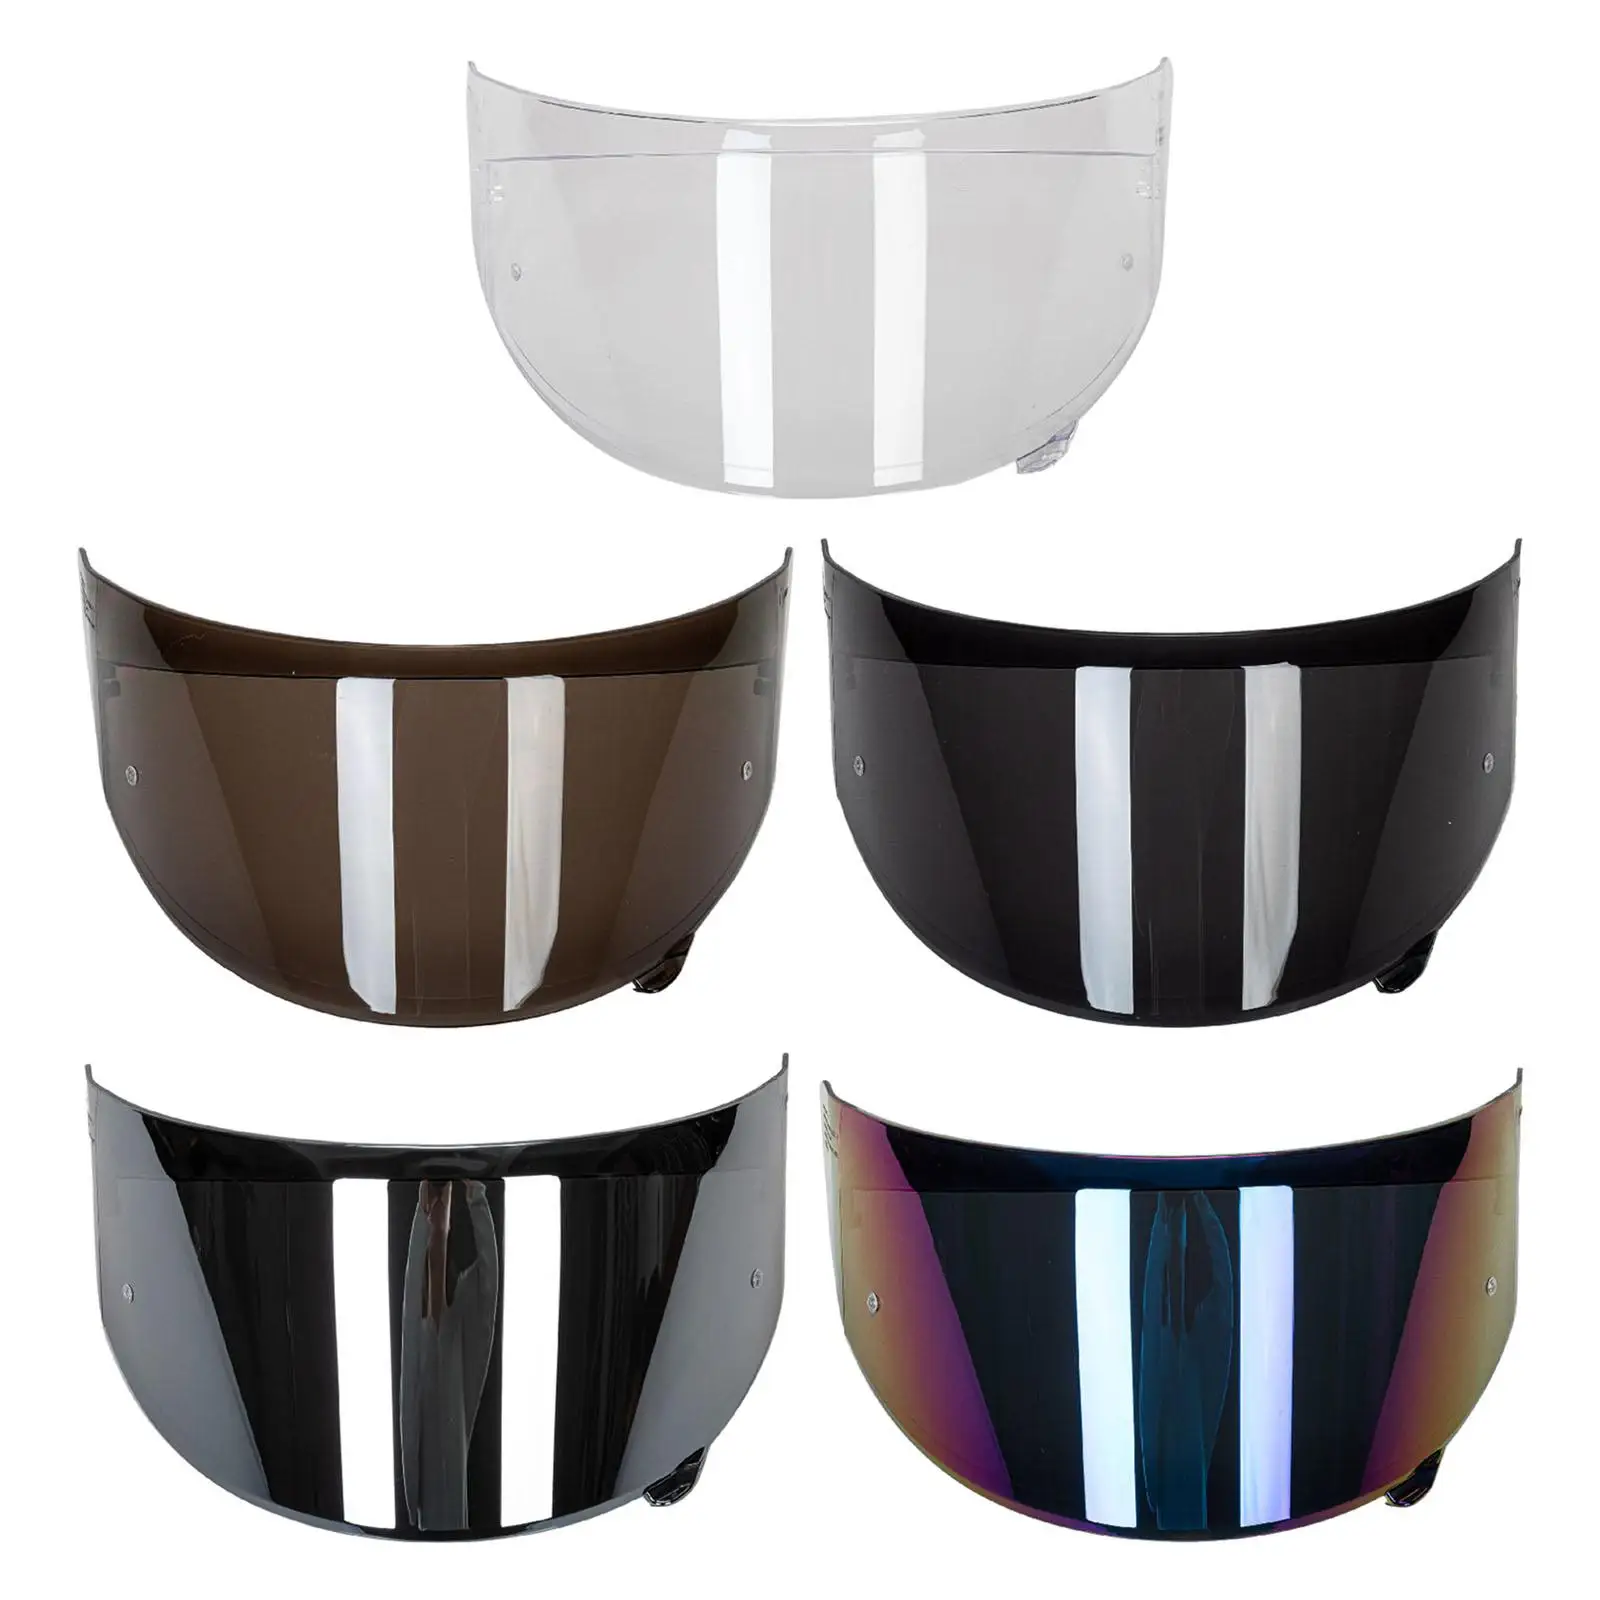 Mt-V-18B Motorcycles lens Scratch Resistant UV400 Protective Cover for